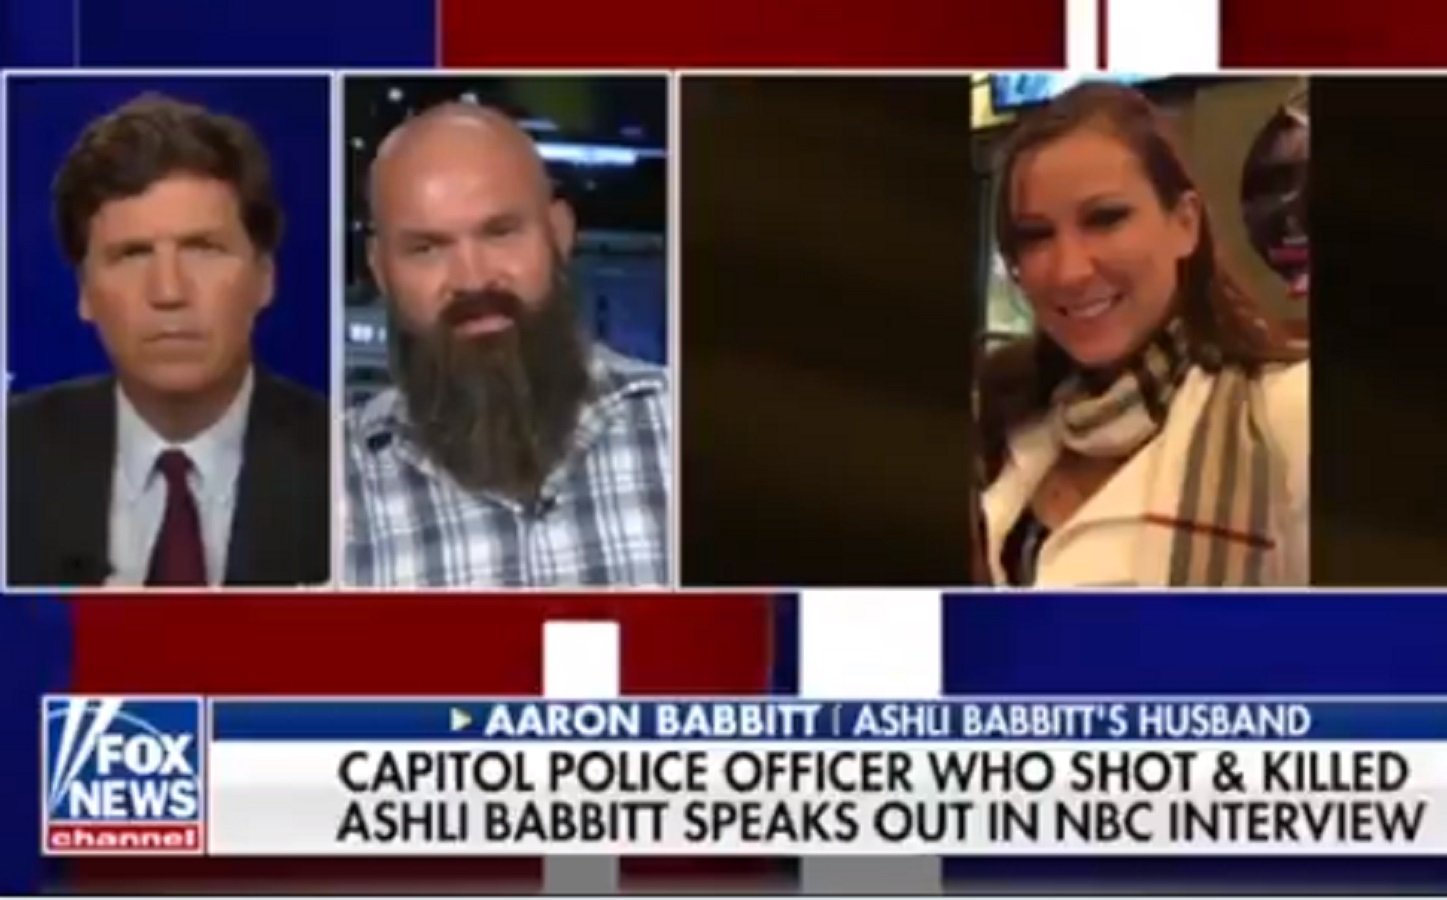  WATCH: Ashli Babbitt’s Husband Appears on Tucker Carlson to Respond to MSNBC Interview With Her Killer